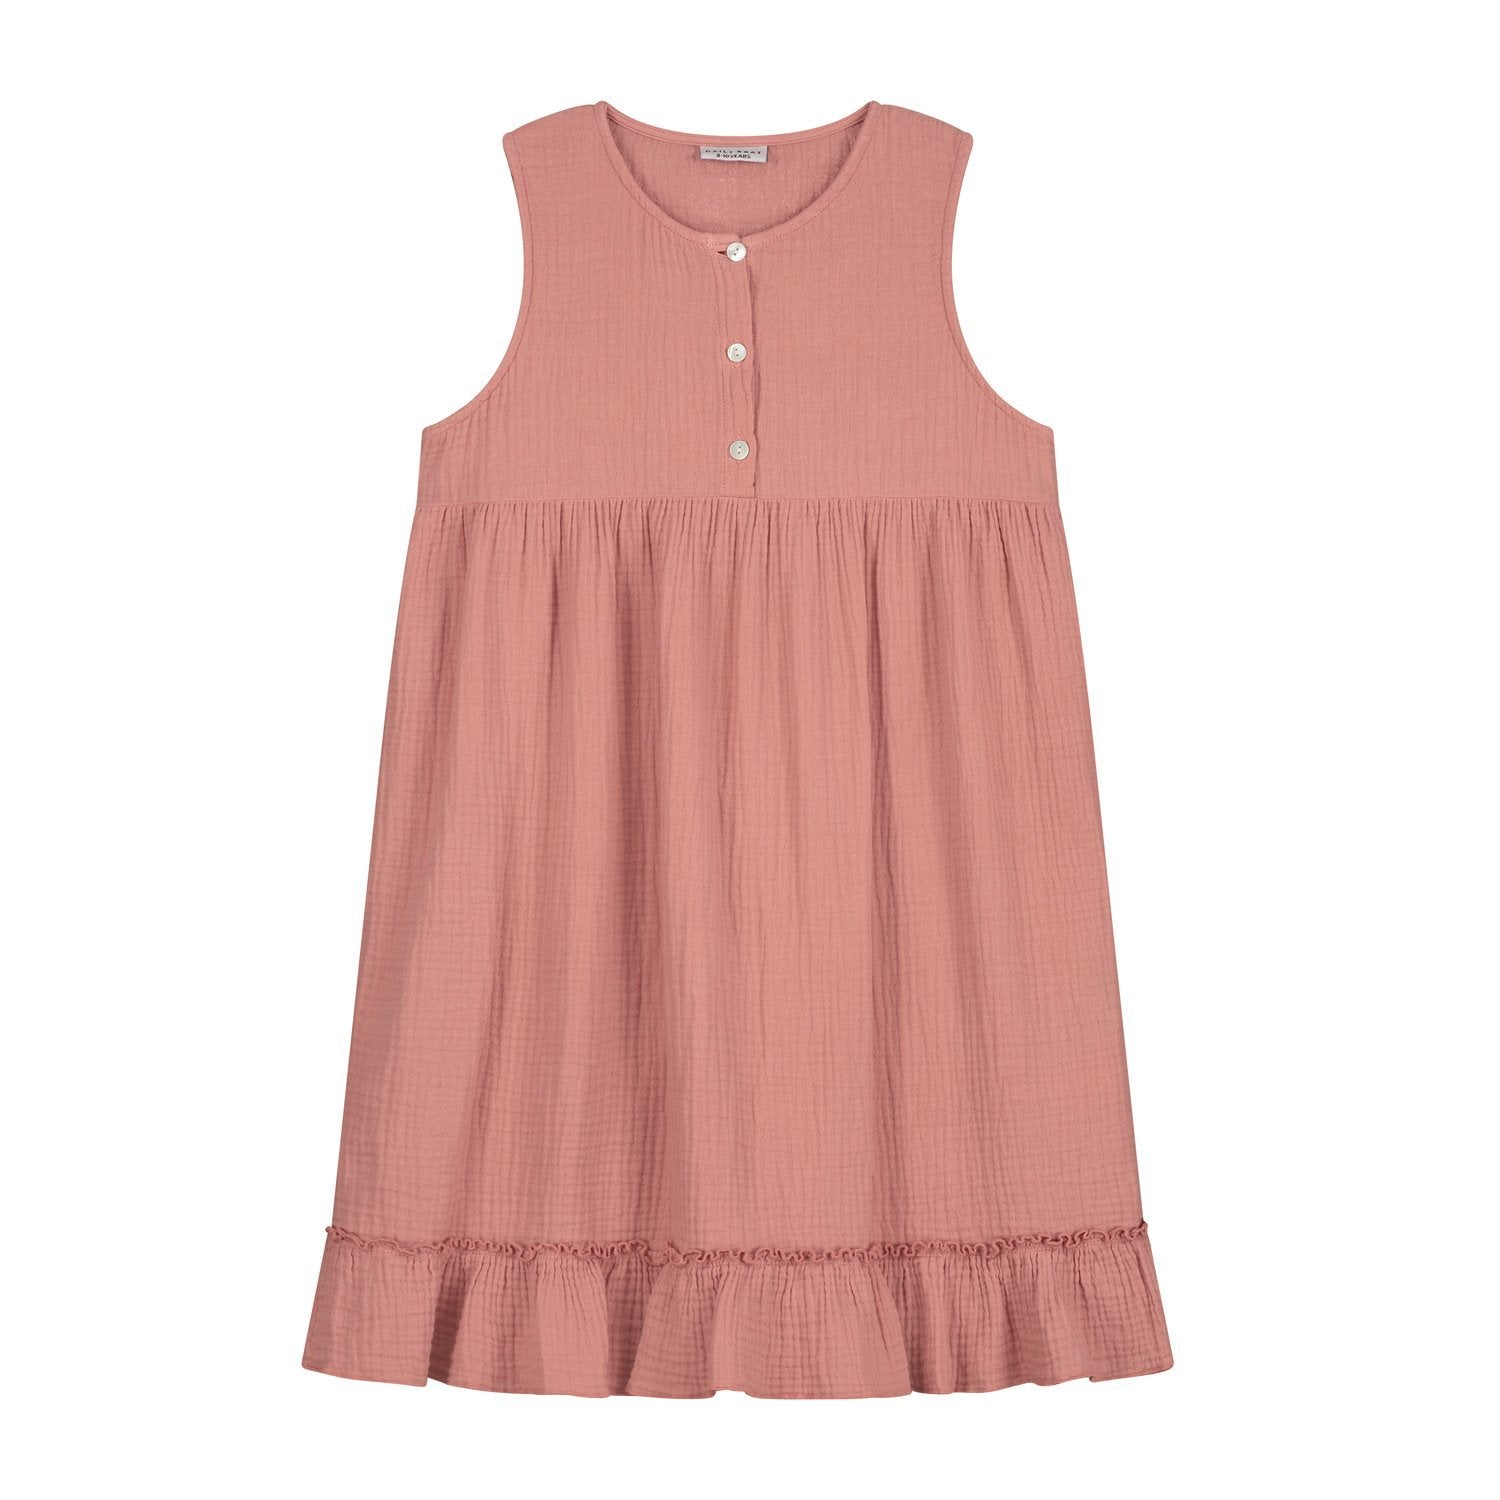 Moon Kleid - Rose Dawn find Stylish Fashion for Little People- at Little Foxx Concept Store